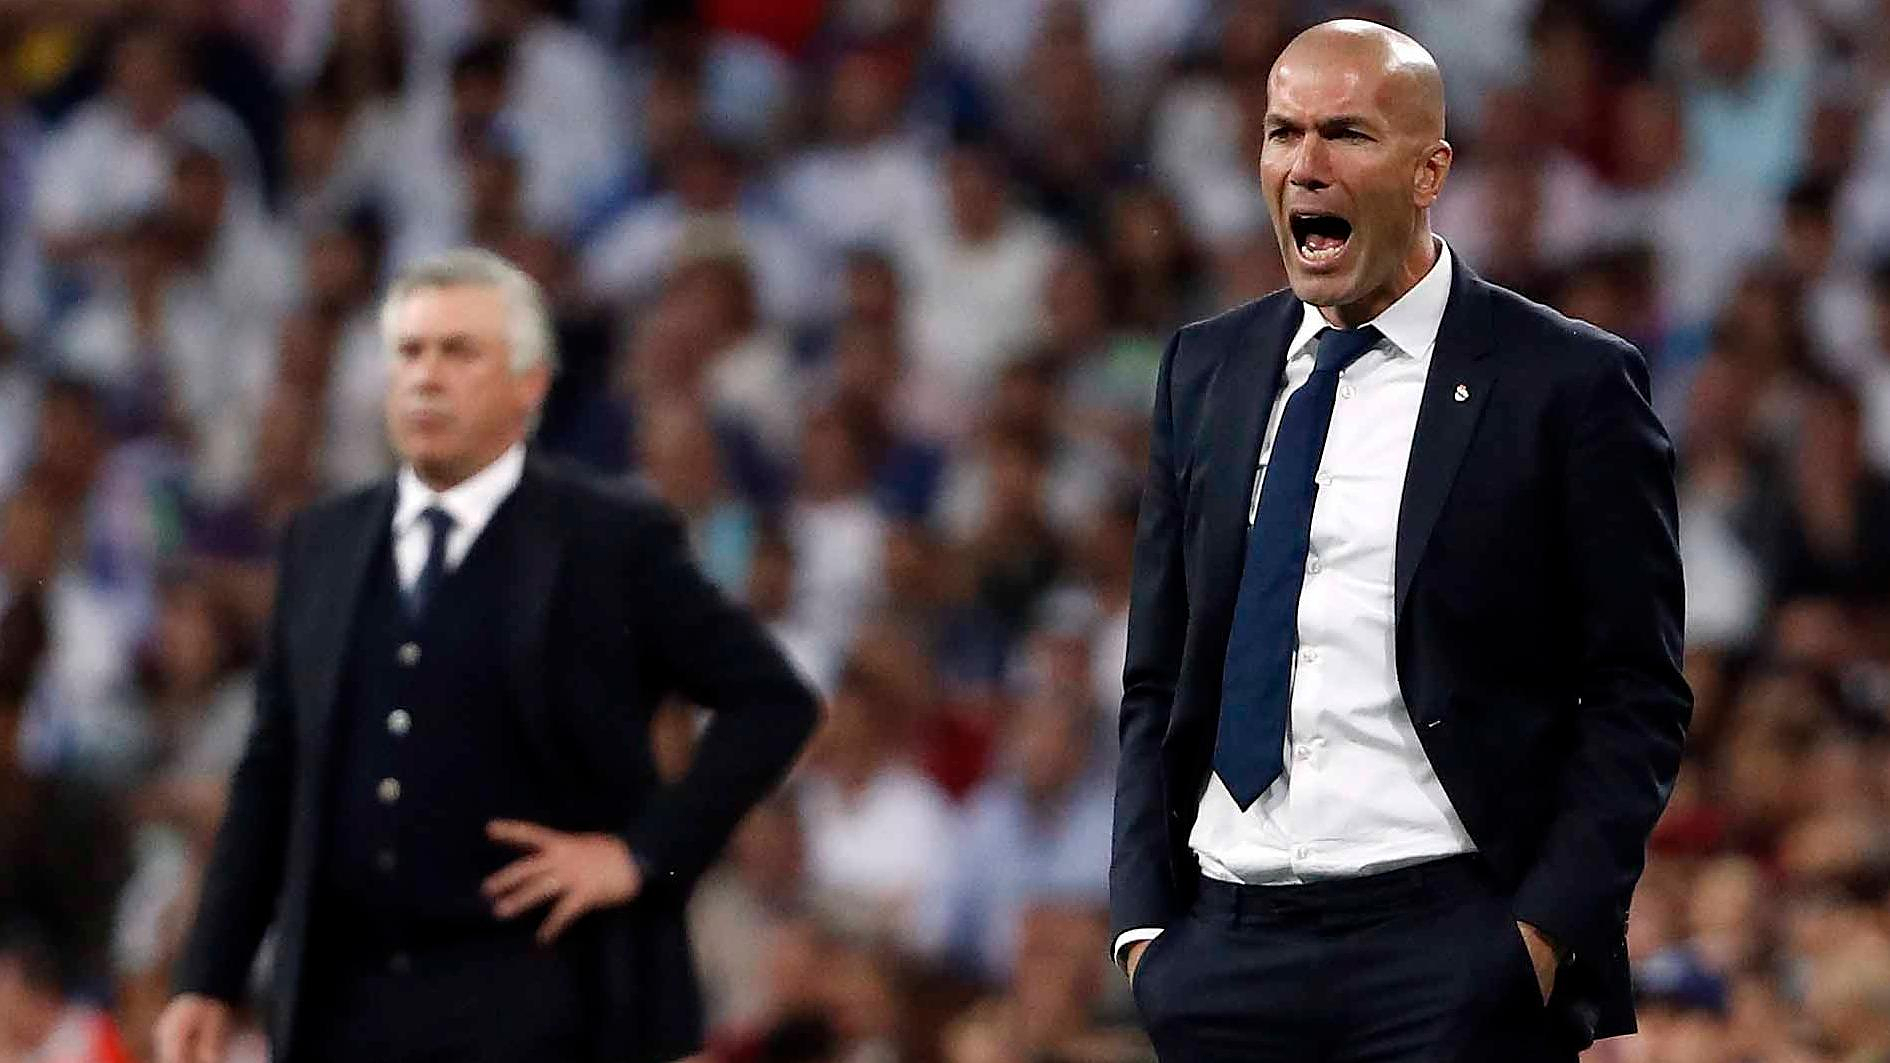 Liga: Zidane soon equaled by Ancelotti in the history of Real Madrid coaches